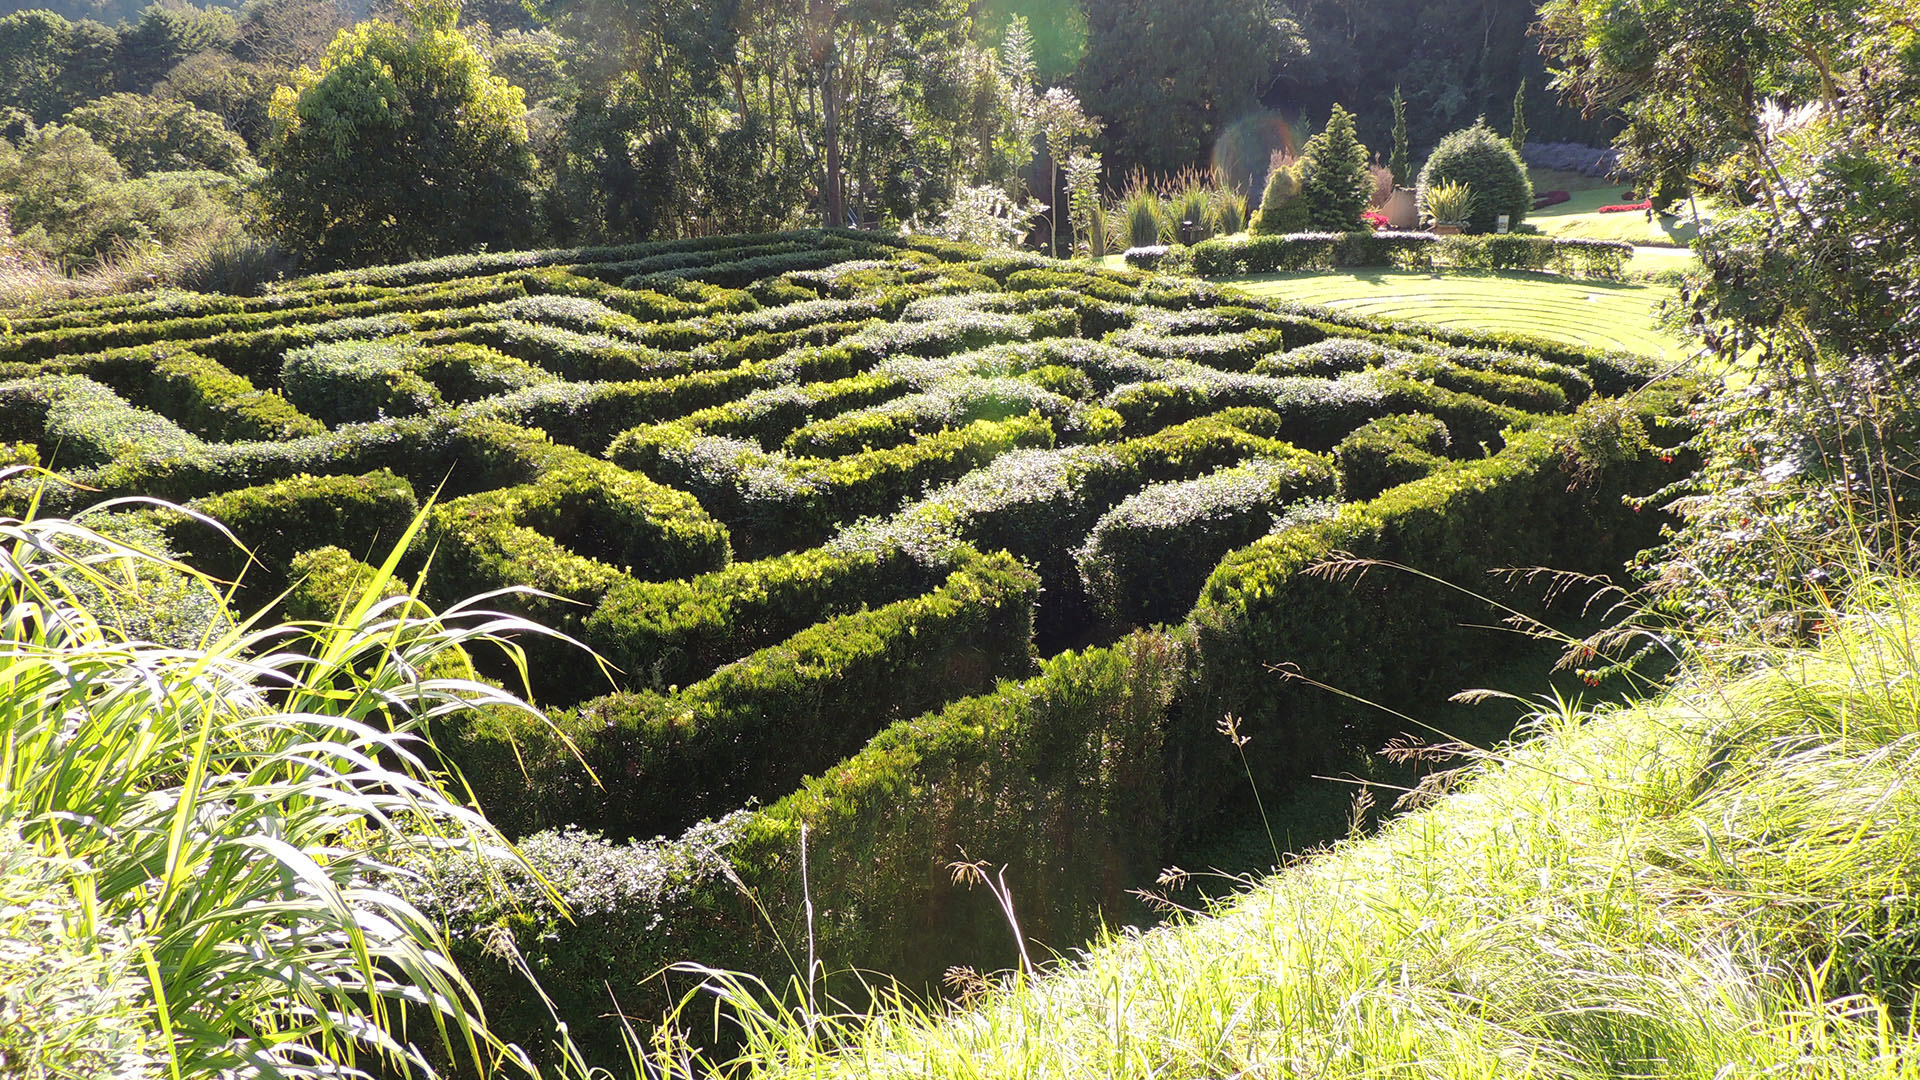 Hedge maze, one of the views